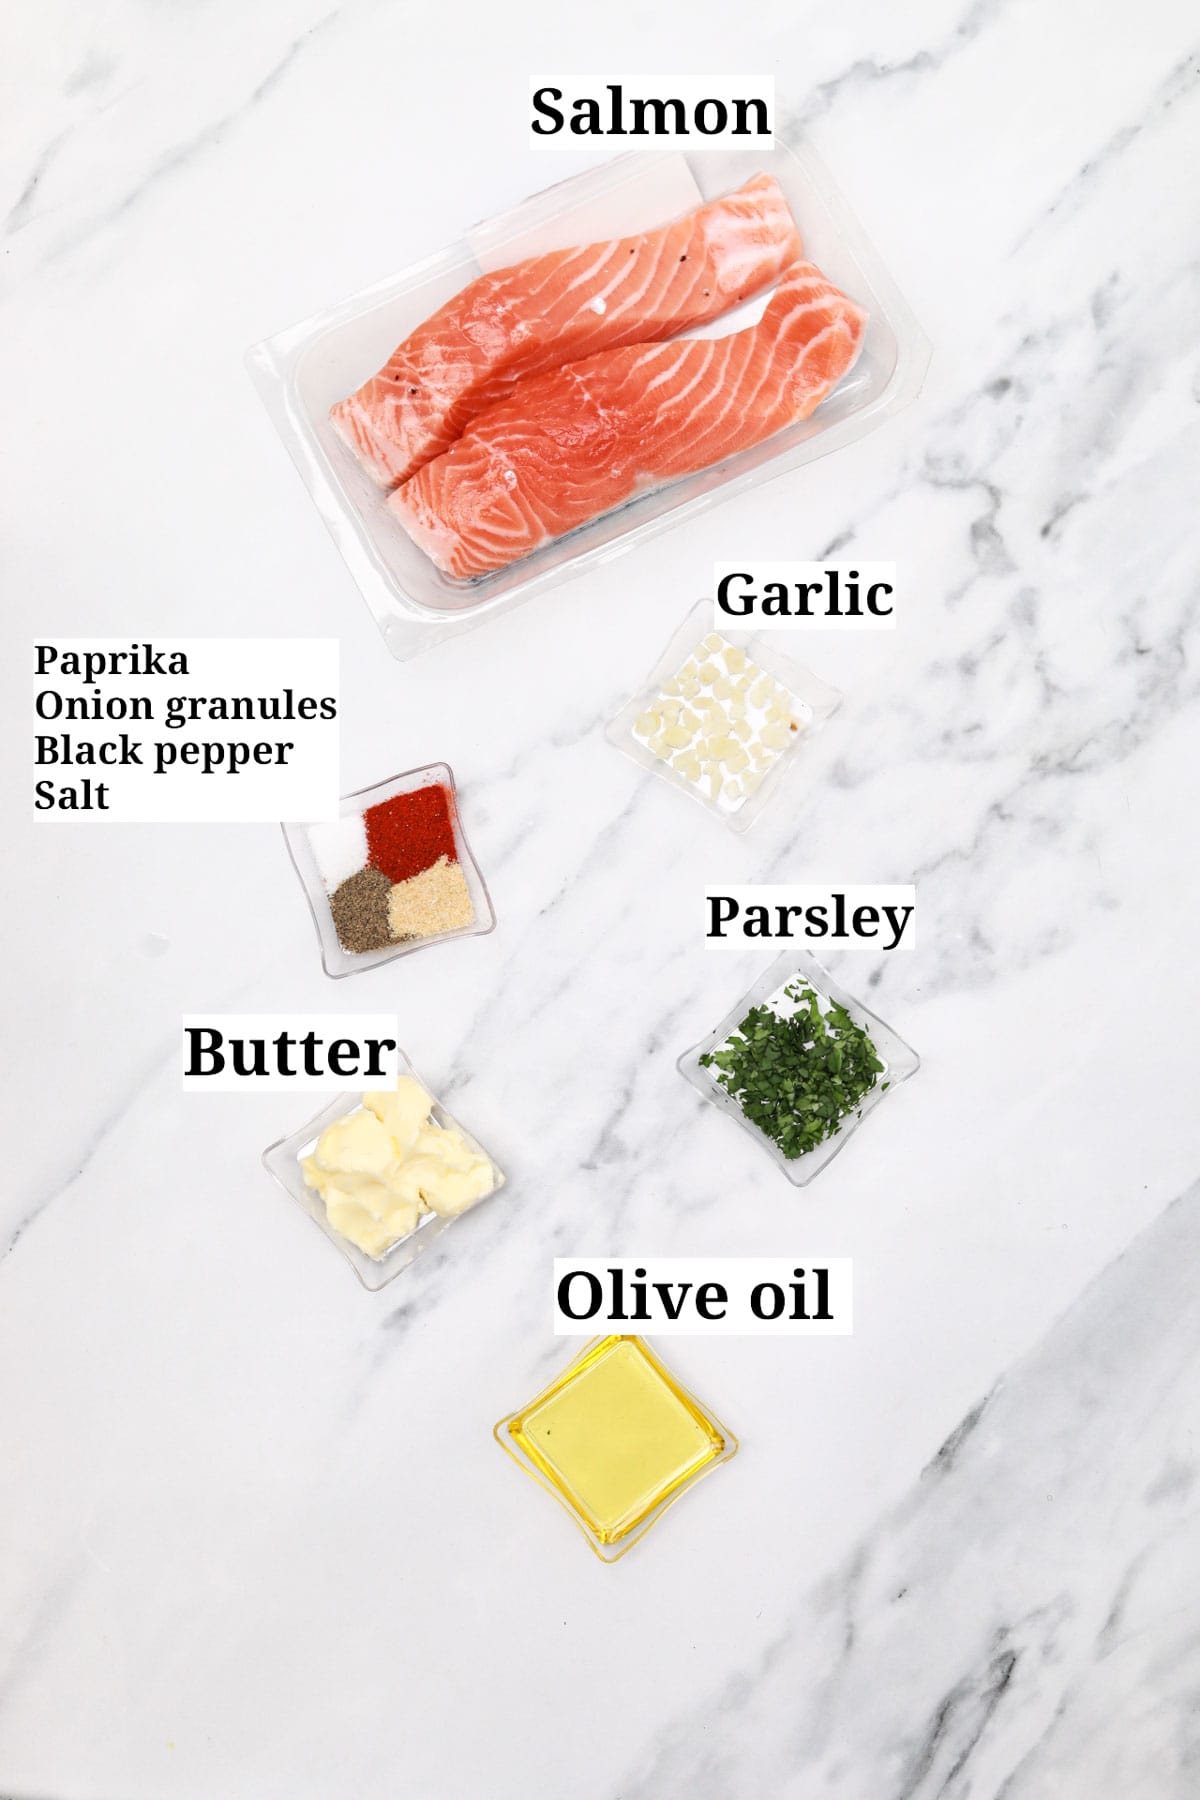 ingredients displayed and labelled.